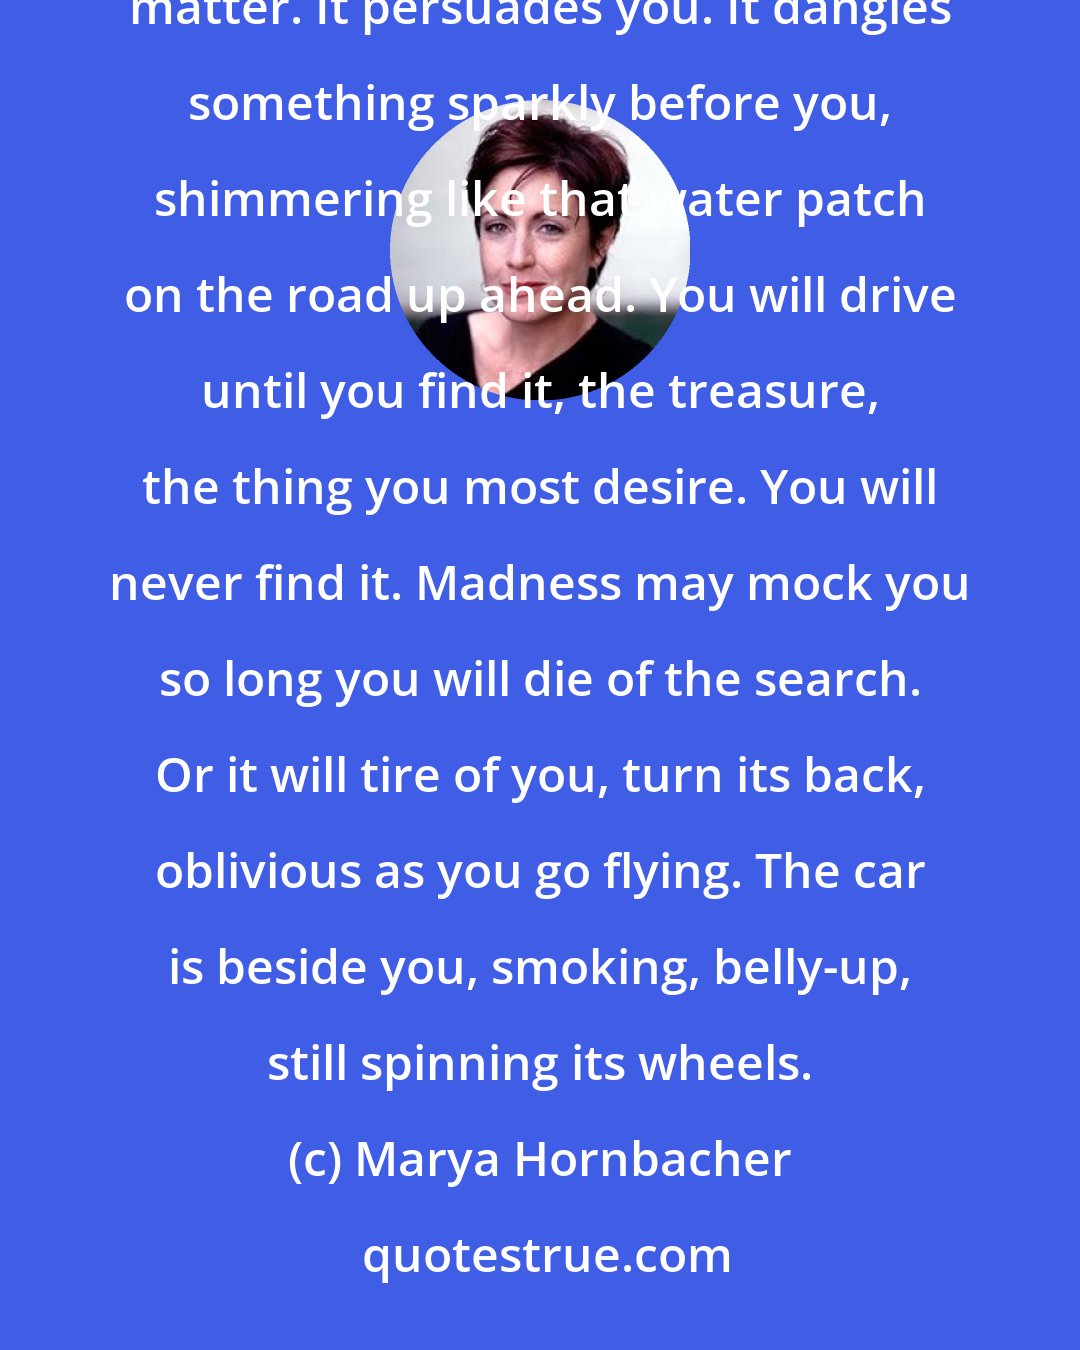 Marya Hornbacher: Madness will push you anywhere it wants. It never tells you where you're going, or why. It tells you it doesn't matter. It persuades you. It dangles something sparkly before you, shimmering like that water patch on the road up ahead. You will drive until you find it, the treasure, the thing you most desire. You will never find it. Madness may mock you so long you will die of the search. Or it will tire of you, turn its back, oblivious as you go flying. The car is beside you, smoking, belly-up, still spinning its wheels.